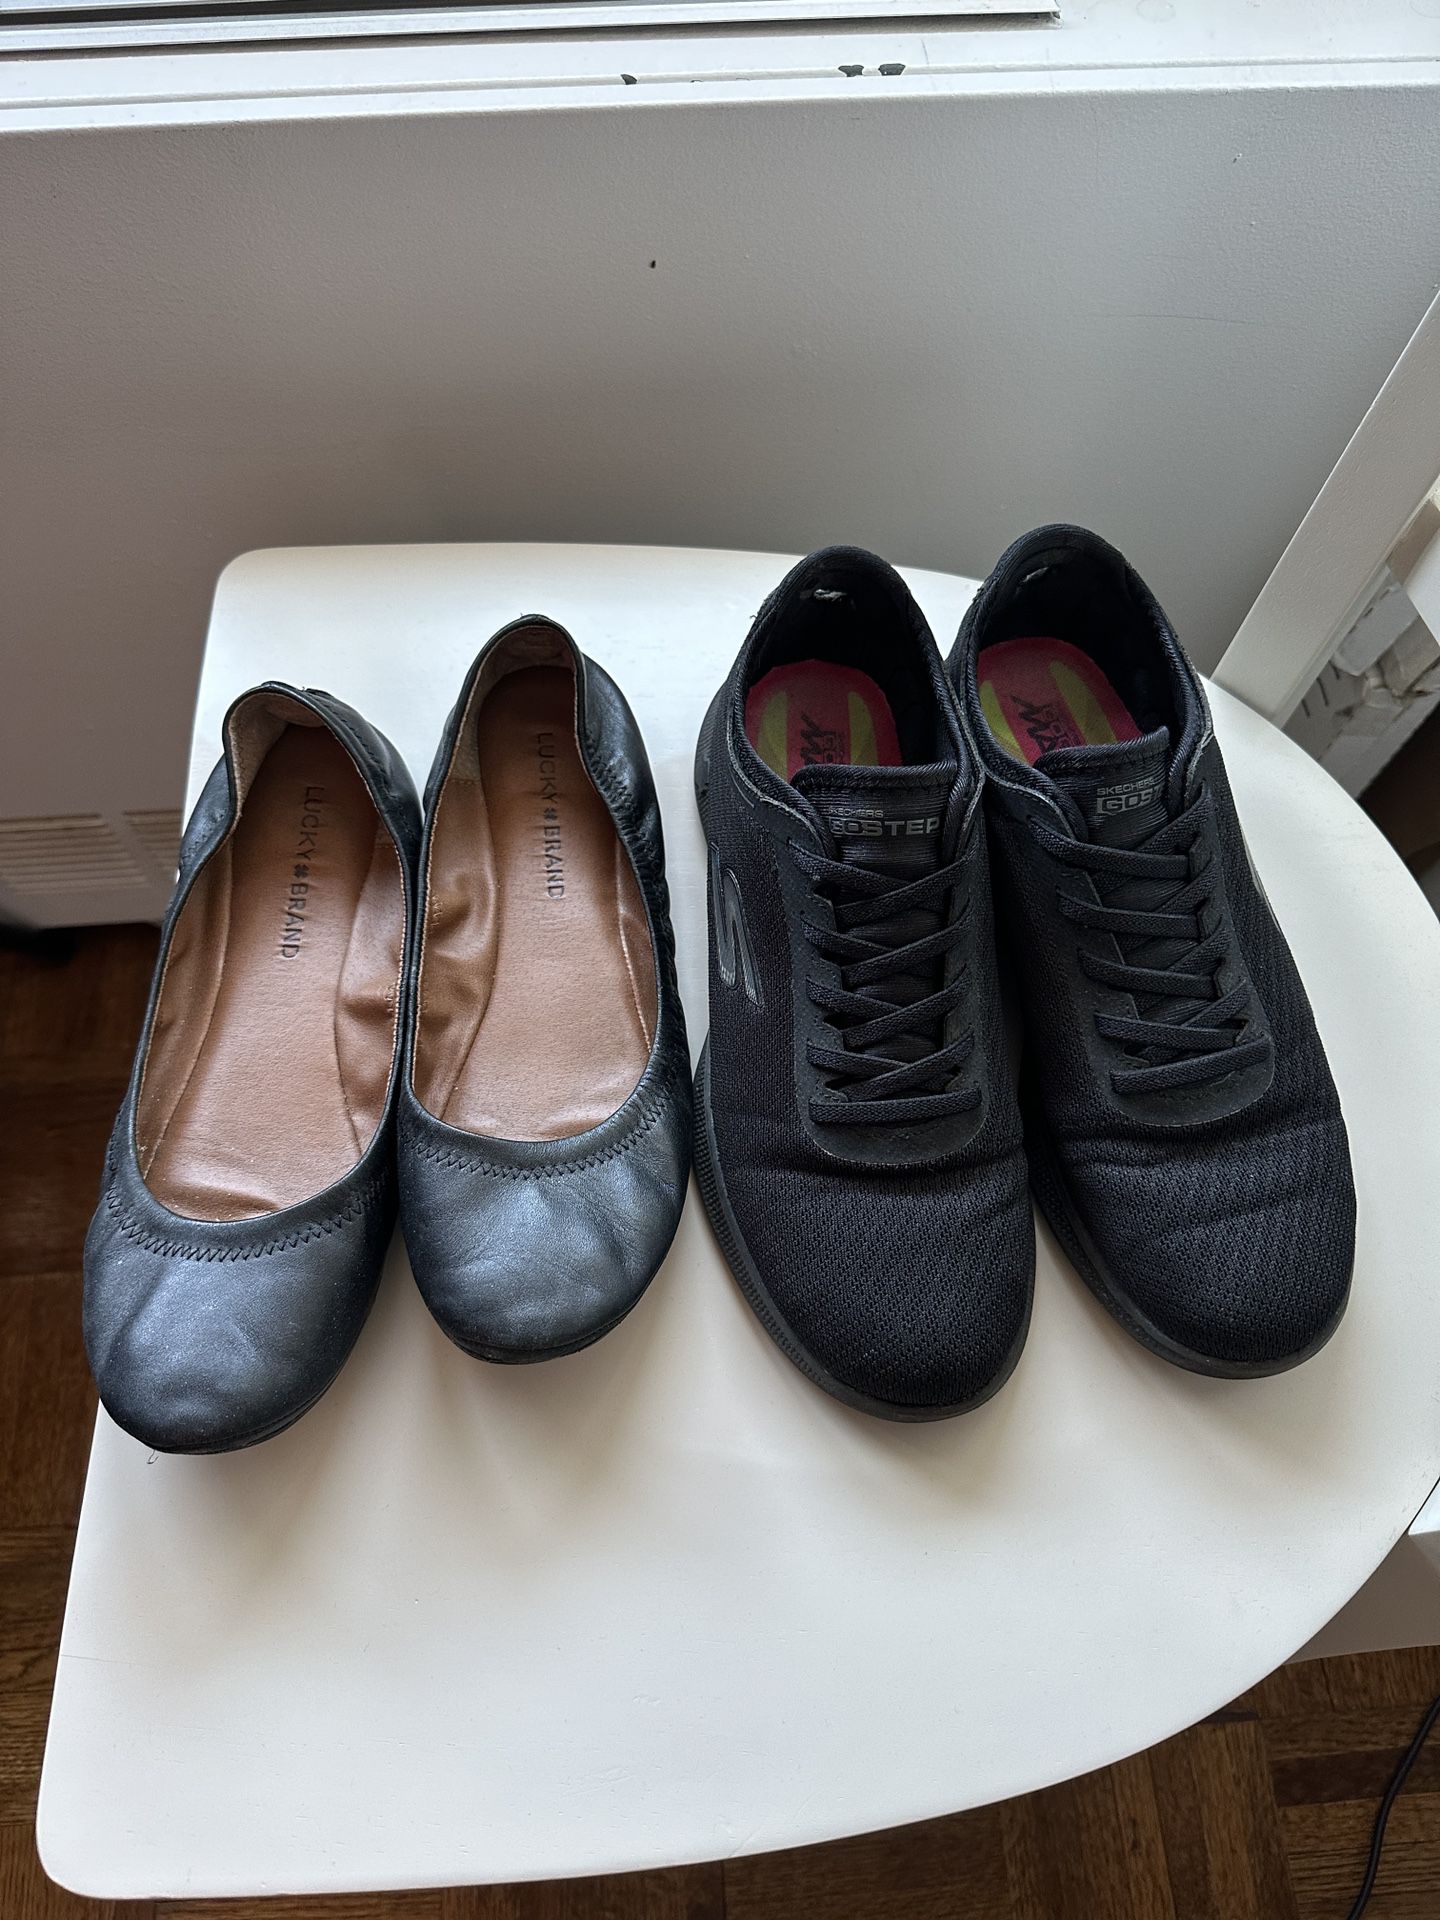 2 Pairs Ladies Shoes, Lucky Ballet Flats, Skechers Sneakers Good Condition $5/each